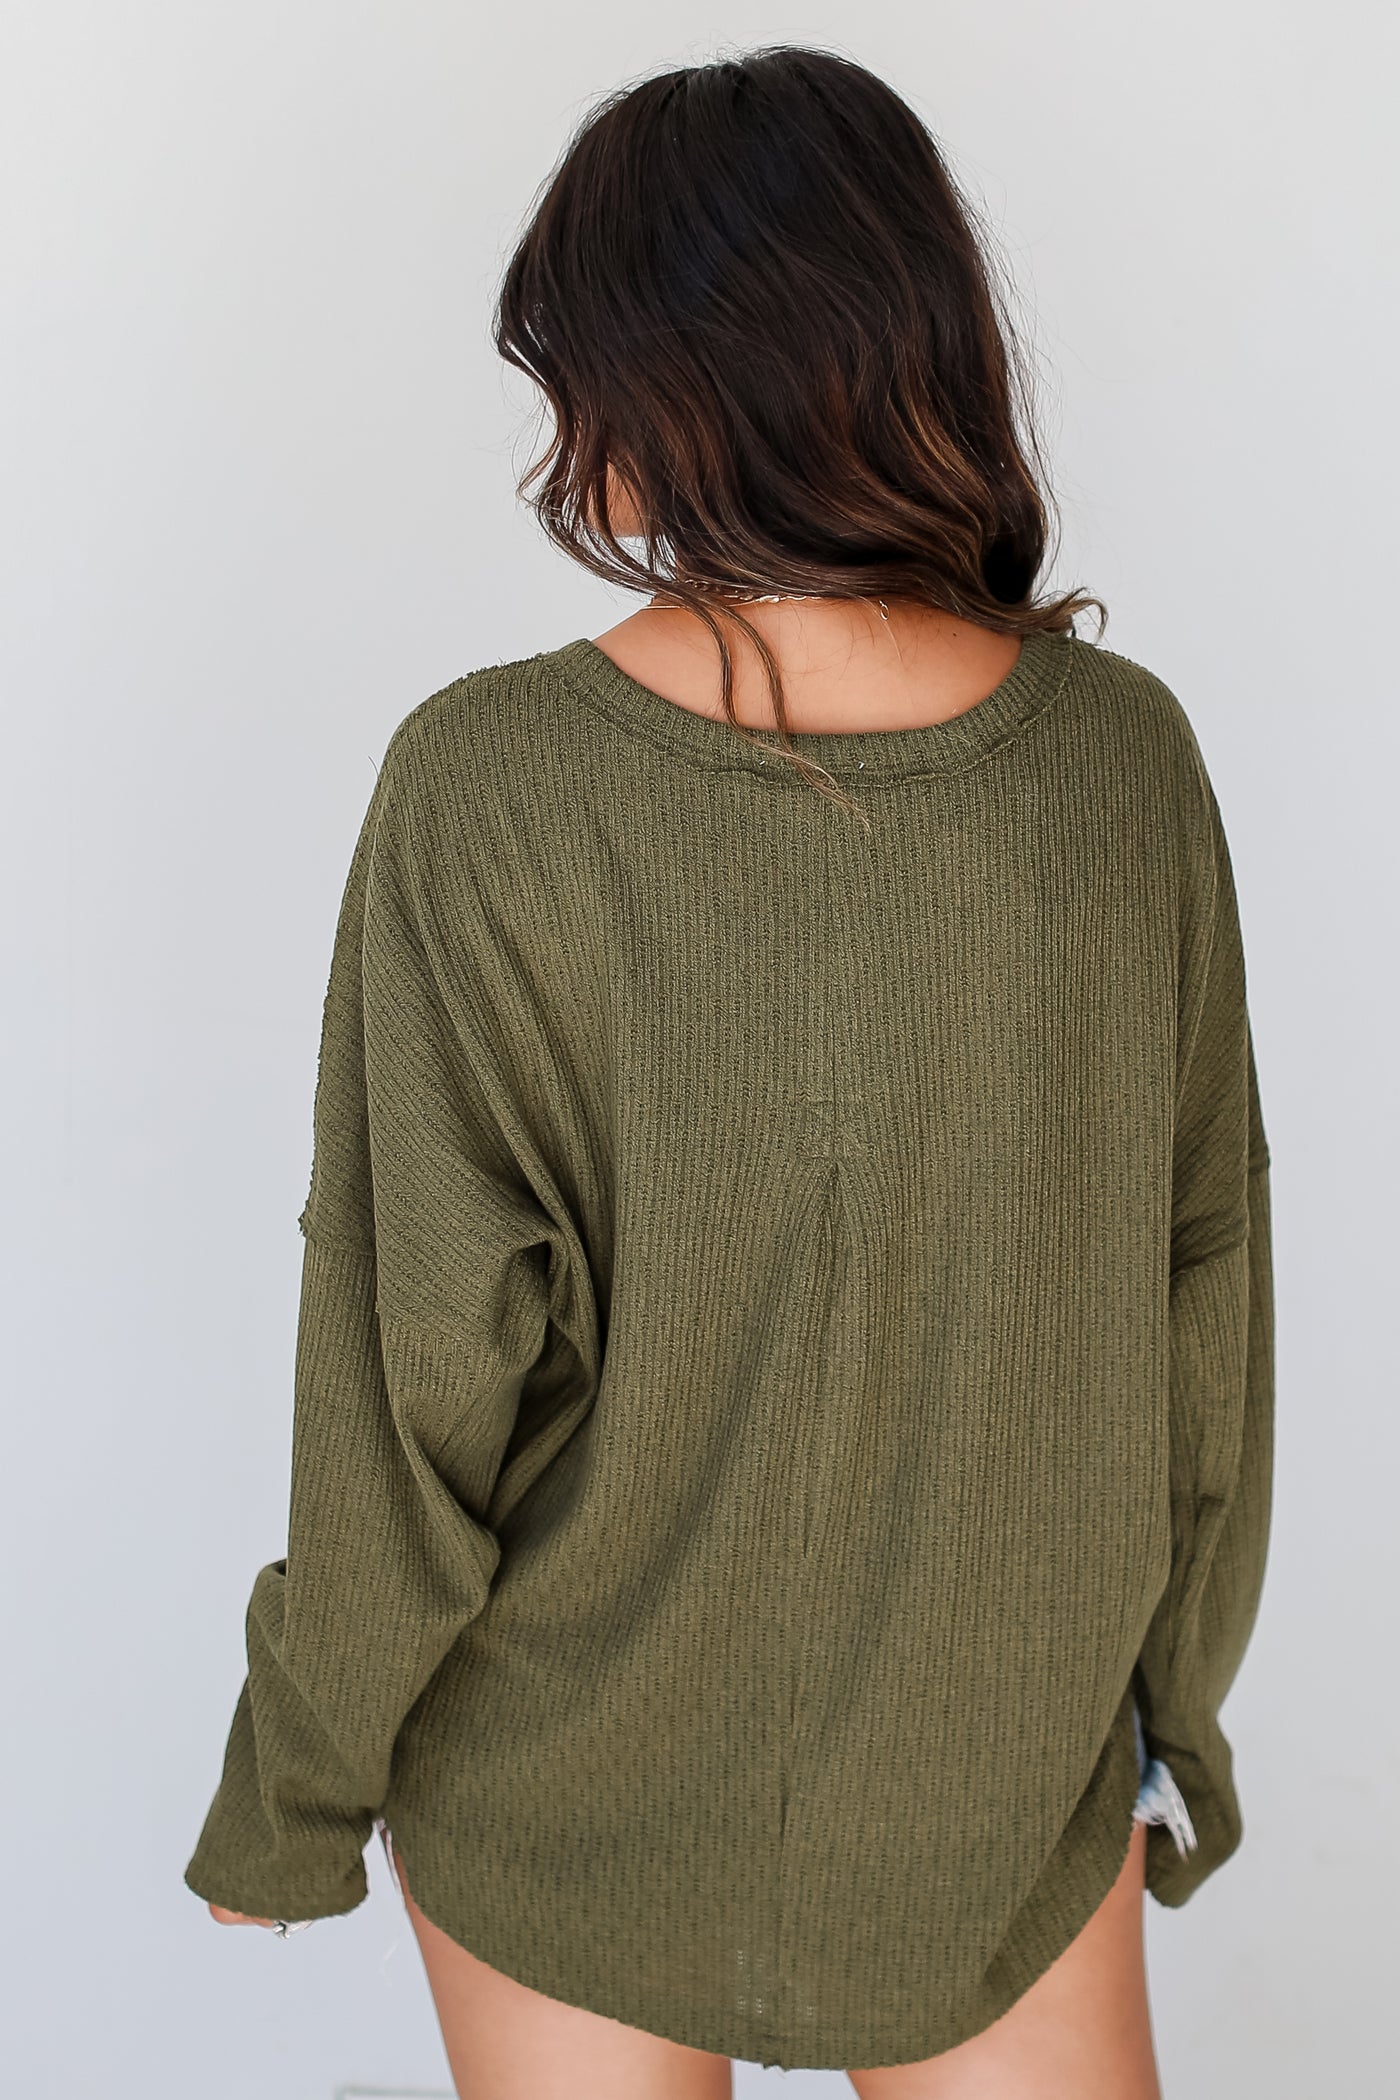 olive Knit Henley Top back view